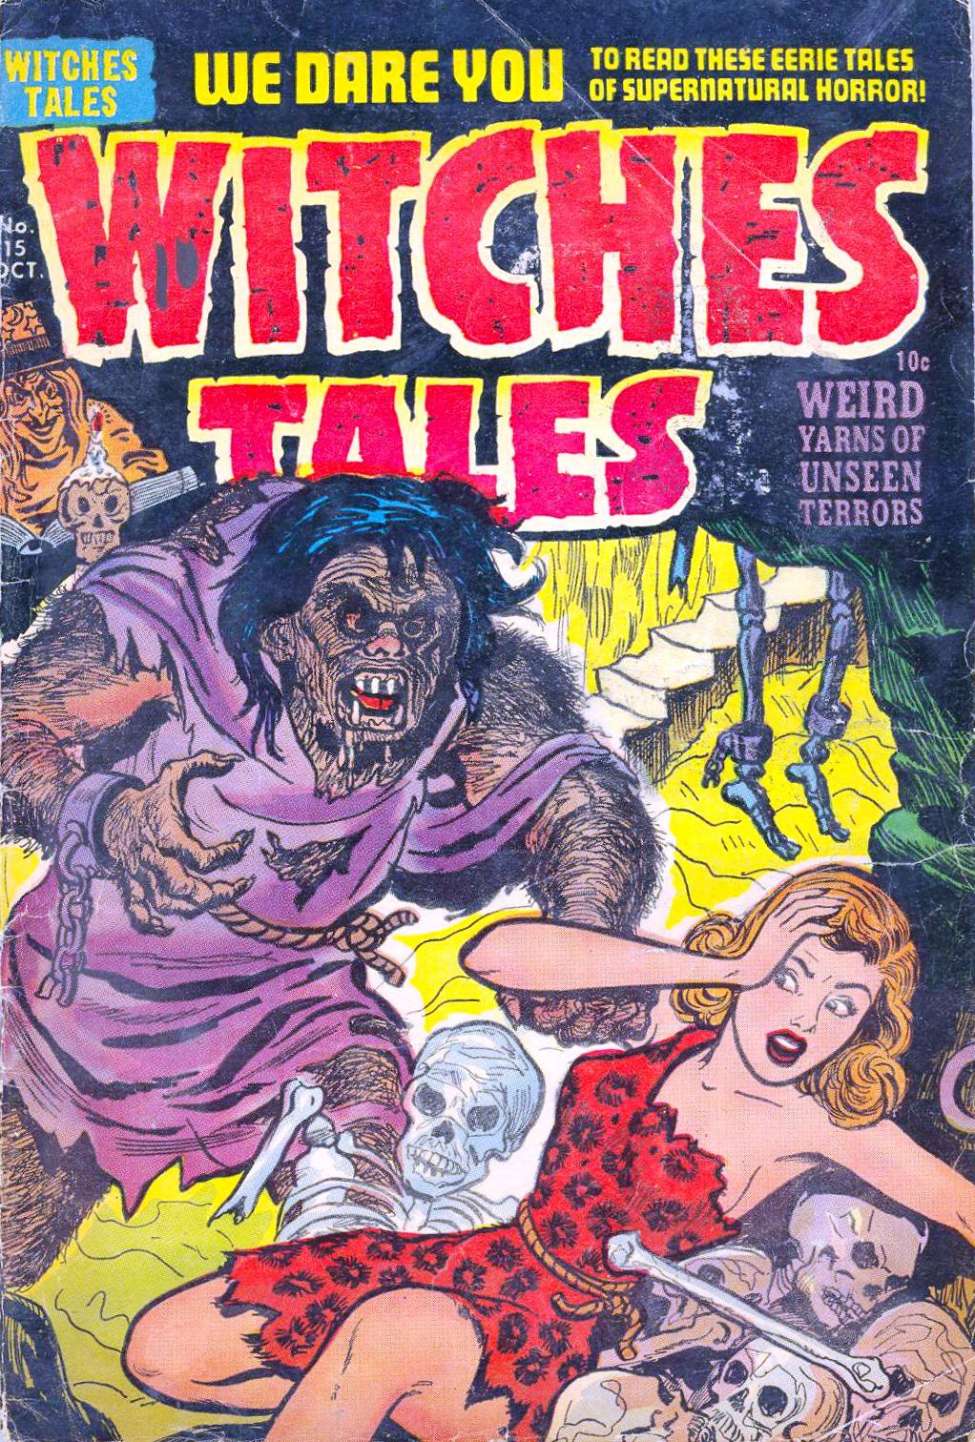 Book Cover For Witches Tales 15